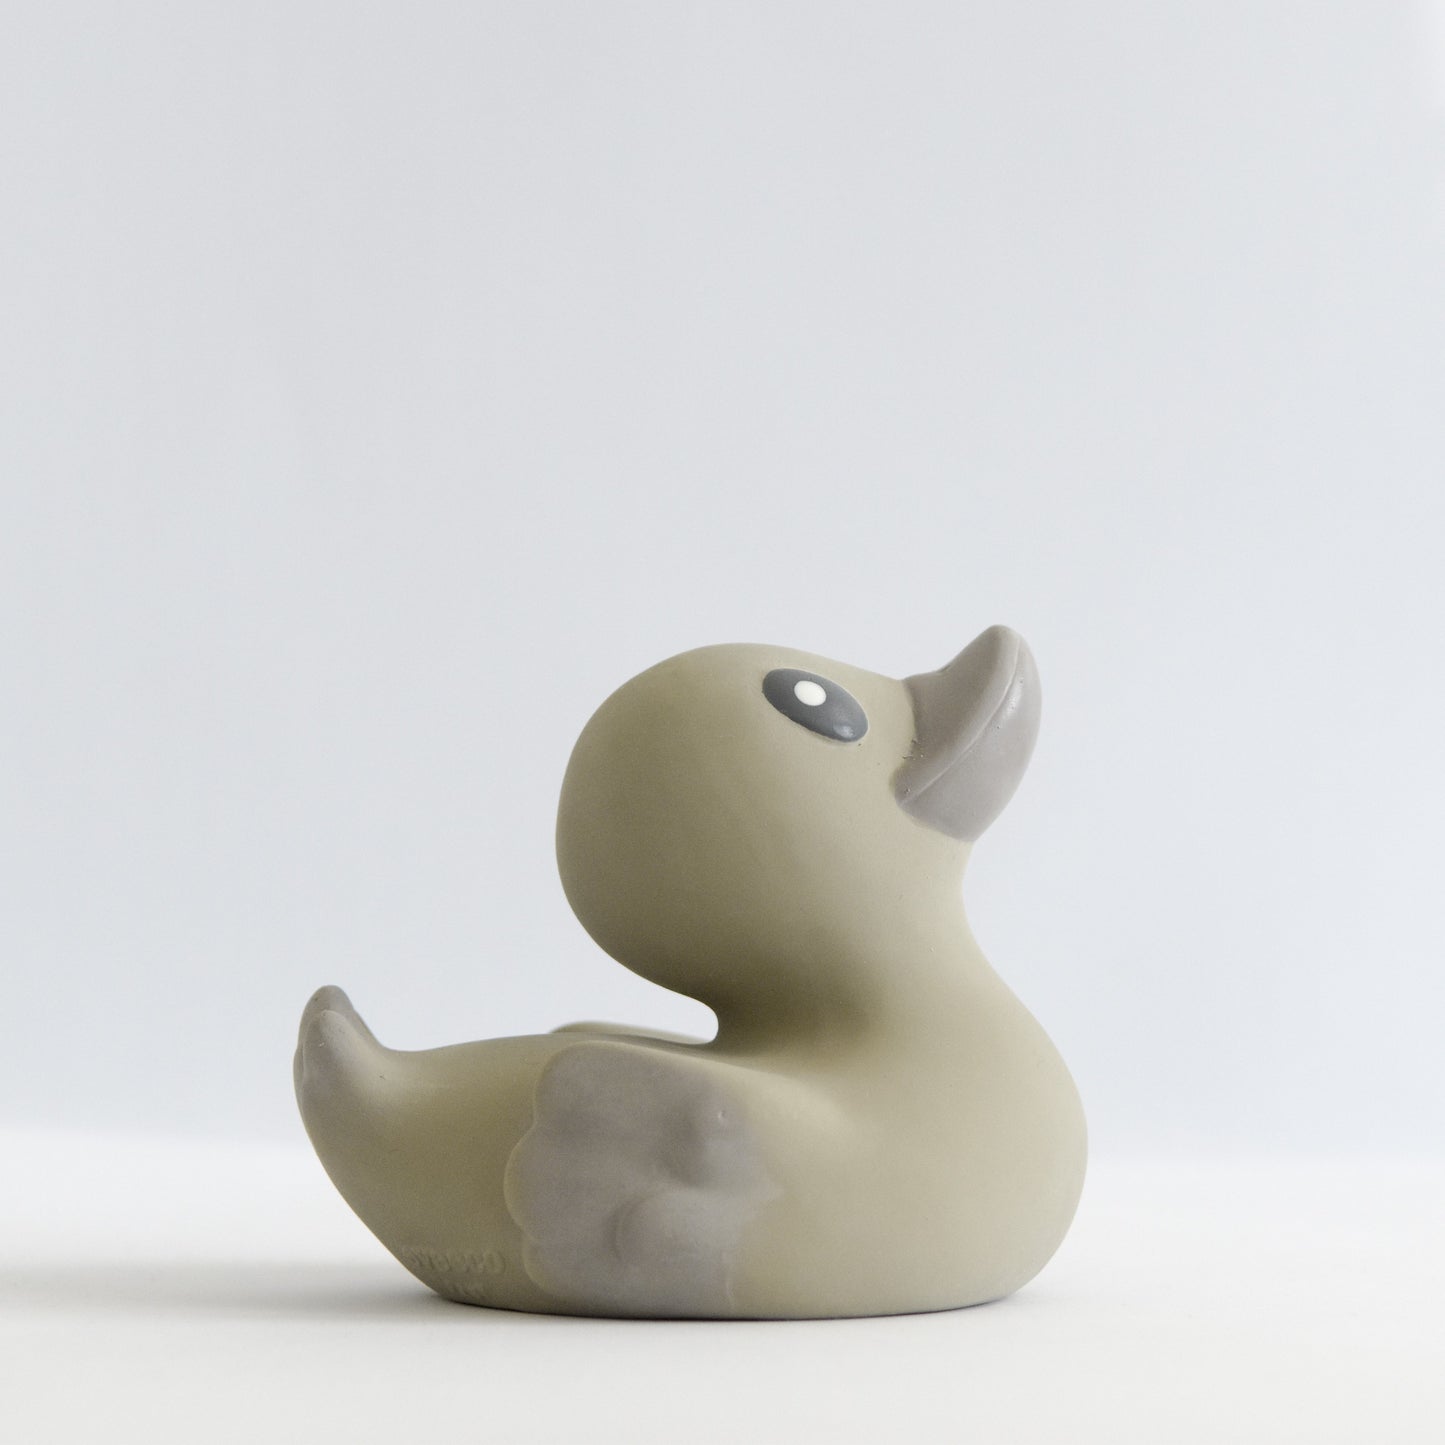 side view of an adorable natural rubber bath toy duck in a neutral brown grey colour